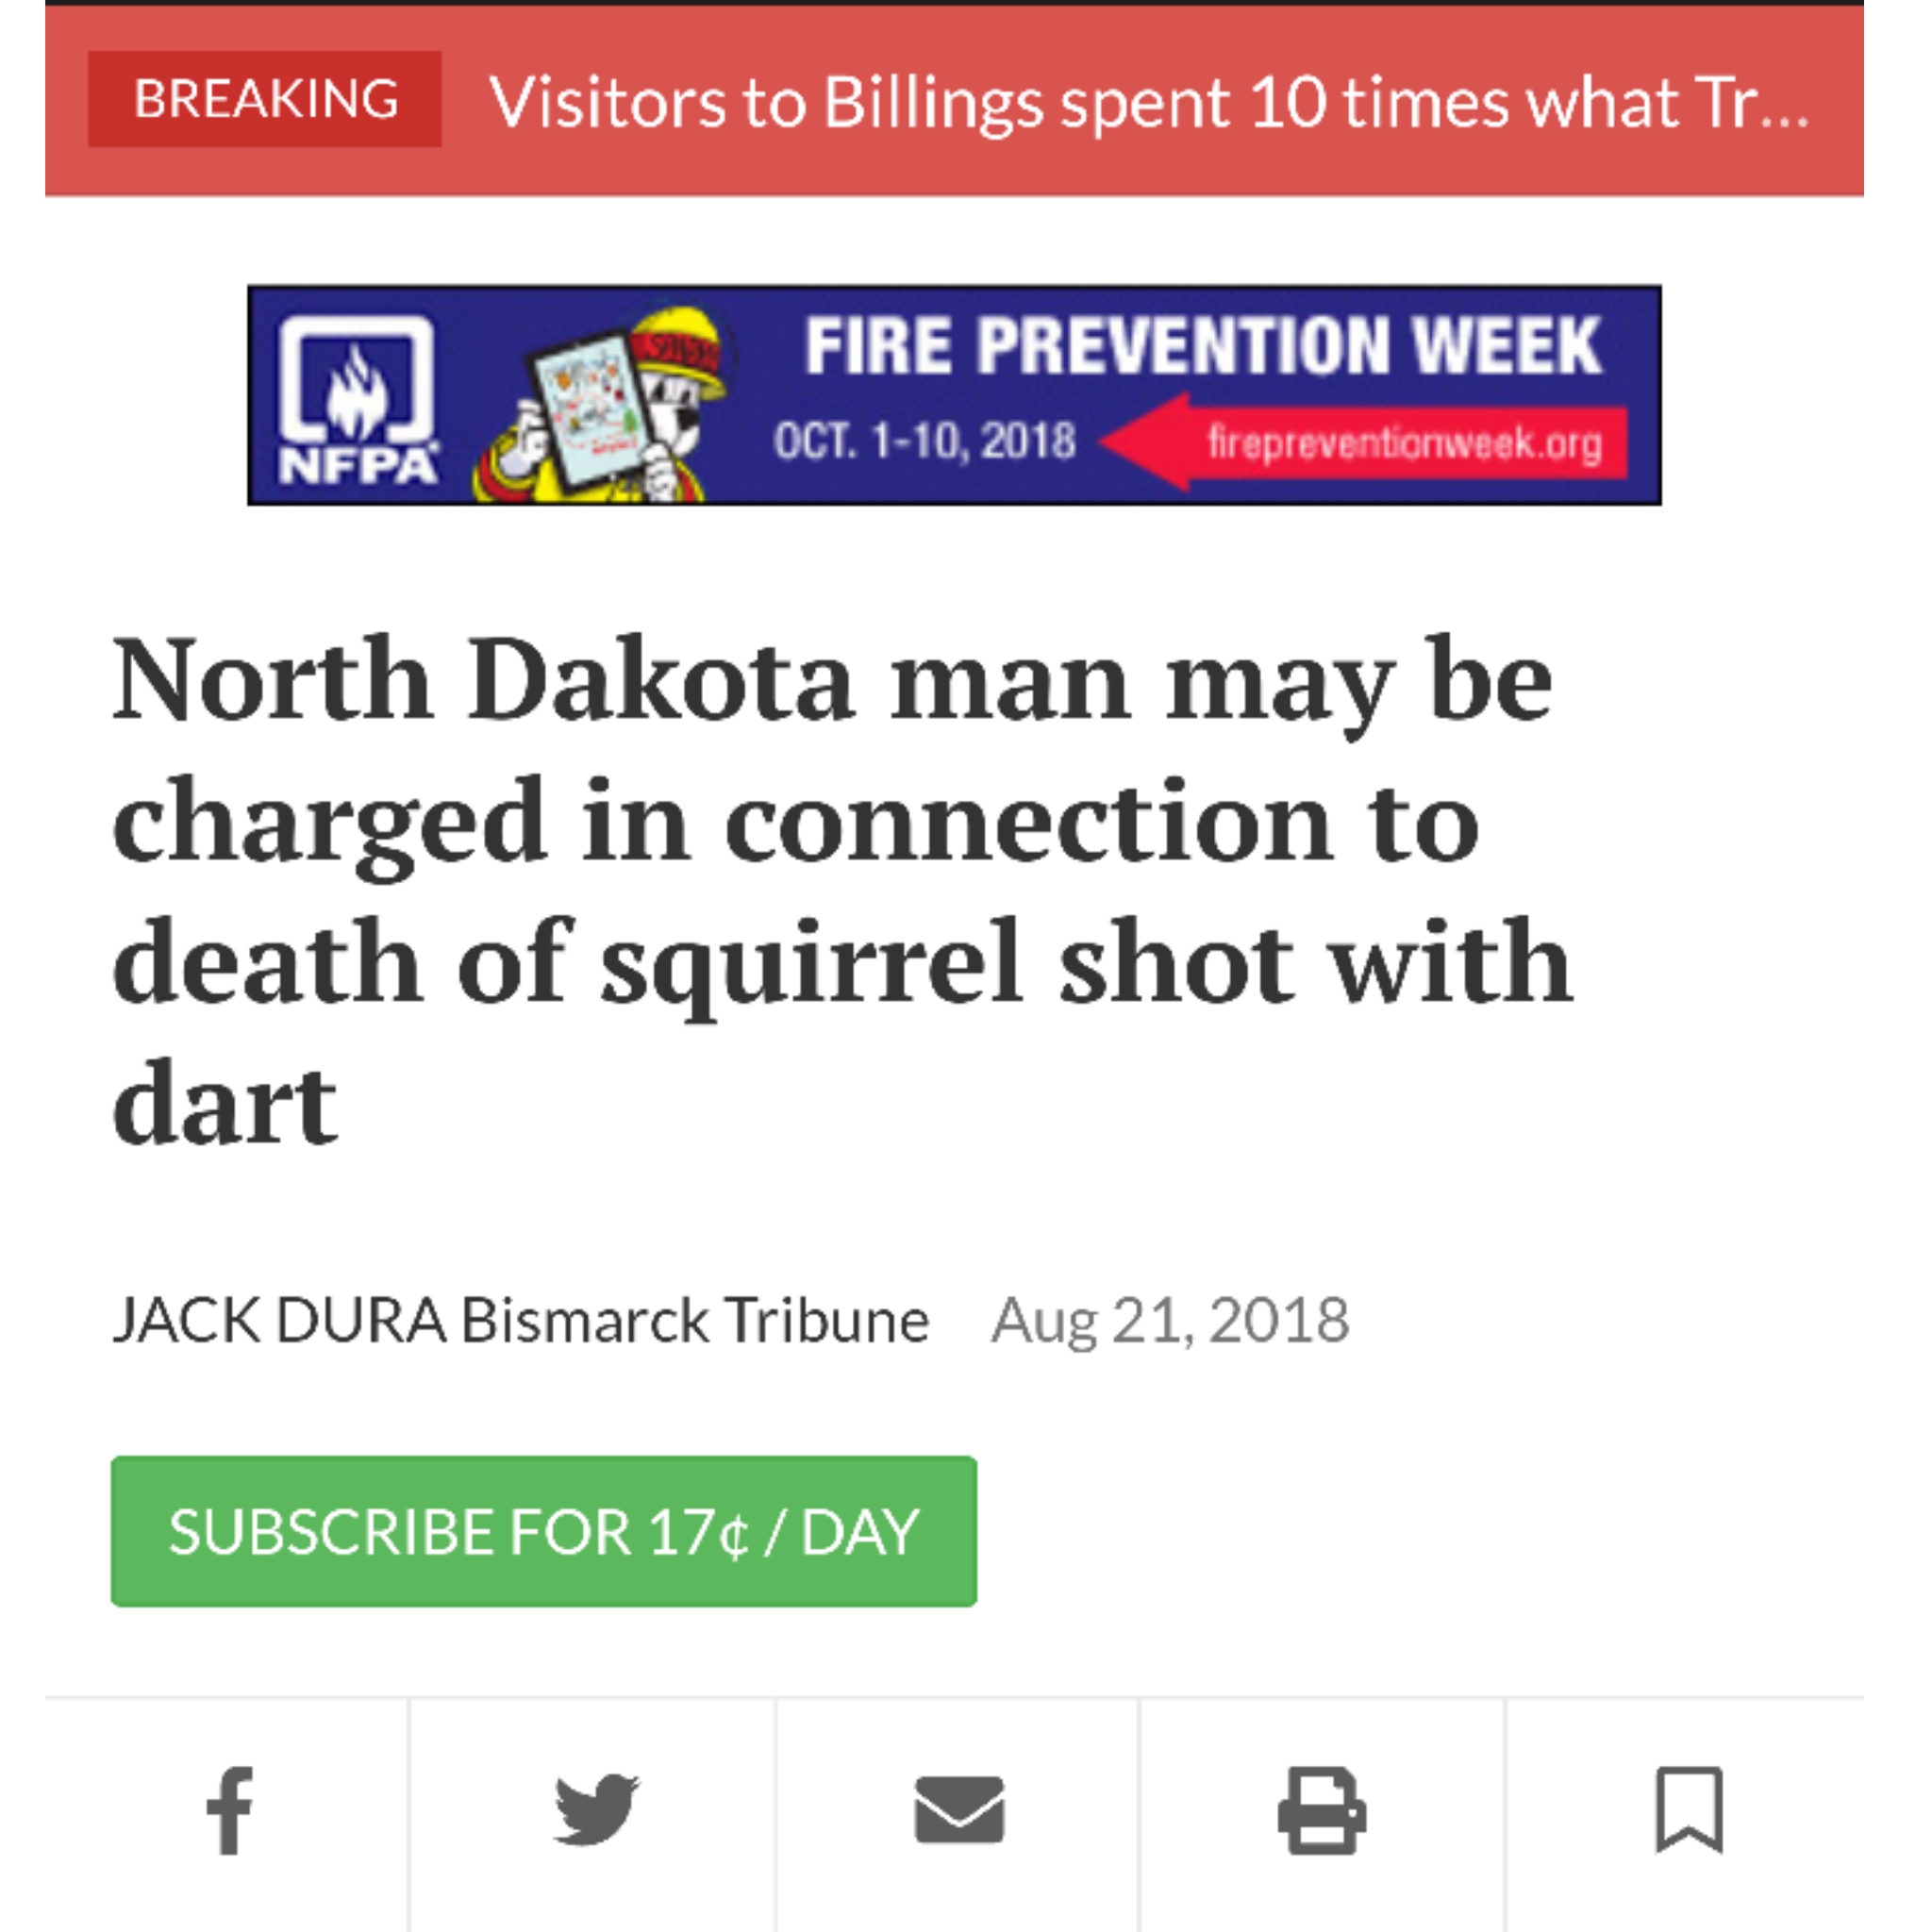 web page - Breaking Visitors to Billings spent 10 times what Tr... D T Fire Prevention Week Oct. 110, 2018 firepreventionweek.org Oct. 110, 2018 Nfpa Prevention, North Dakota man may be charged in connection to death of squirrel shot with dart Jack Dura B